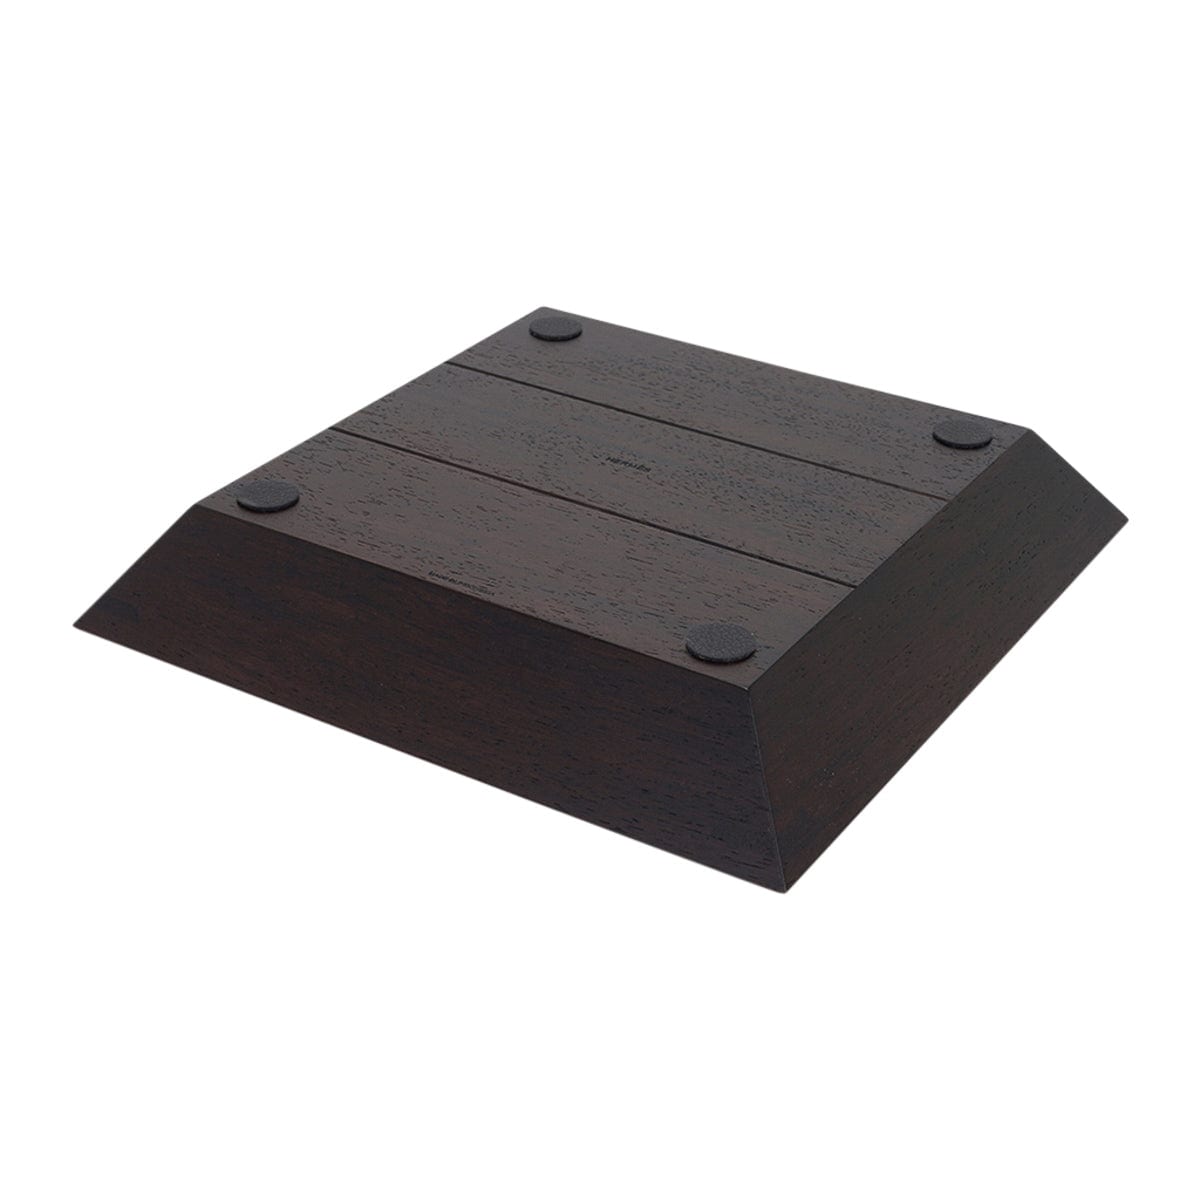 Hermes Chakor Change Tray Square Wood and Leather Center